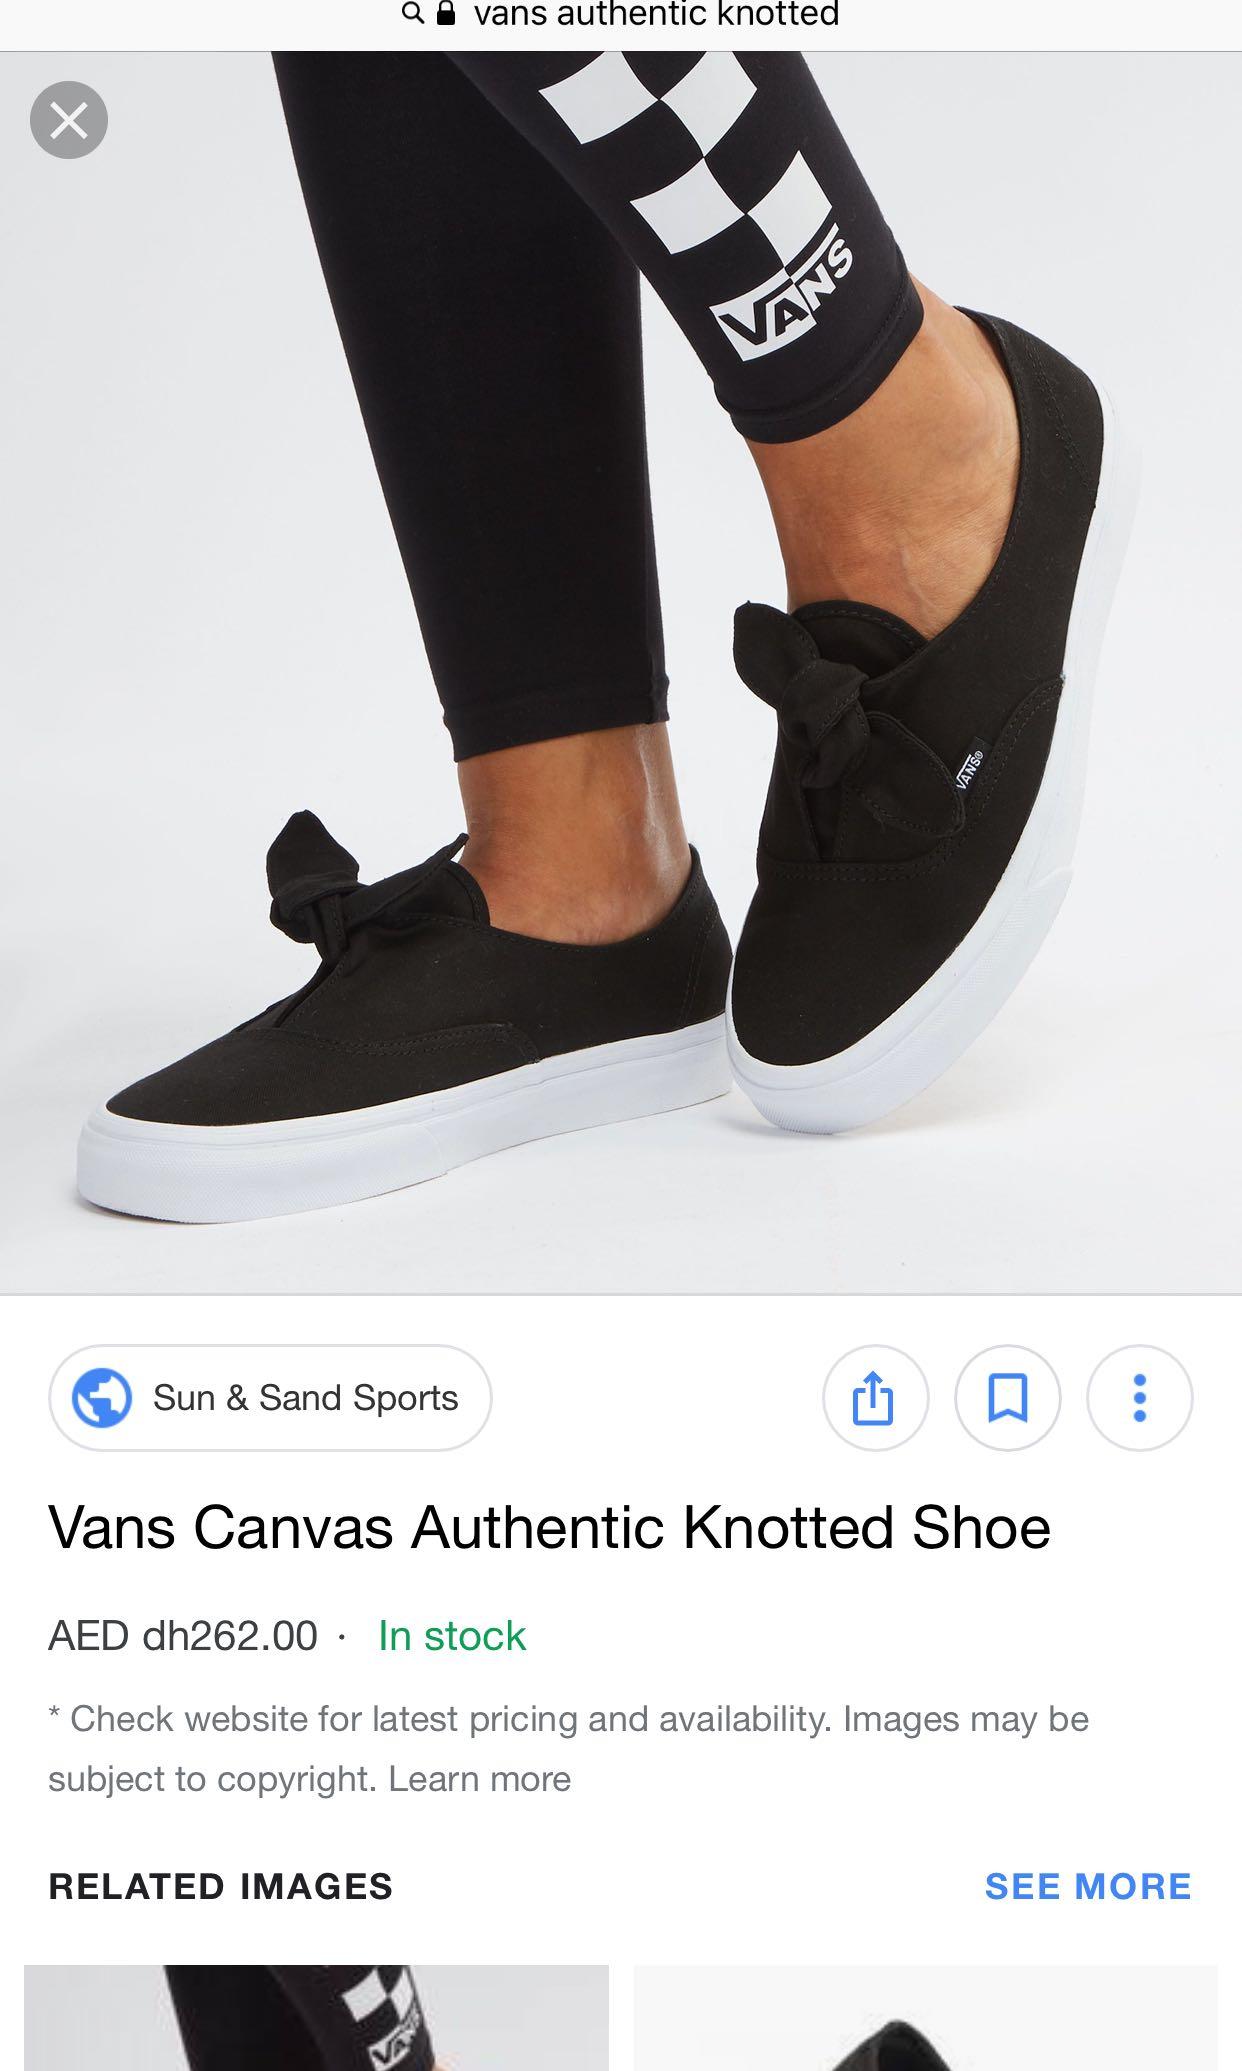 authentic knotted vans